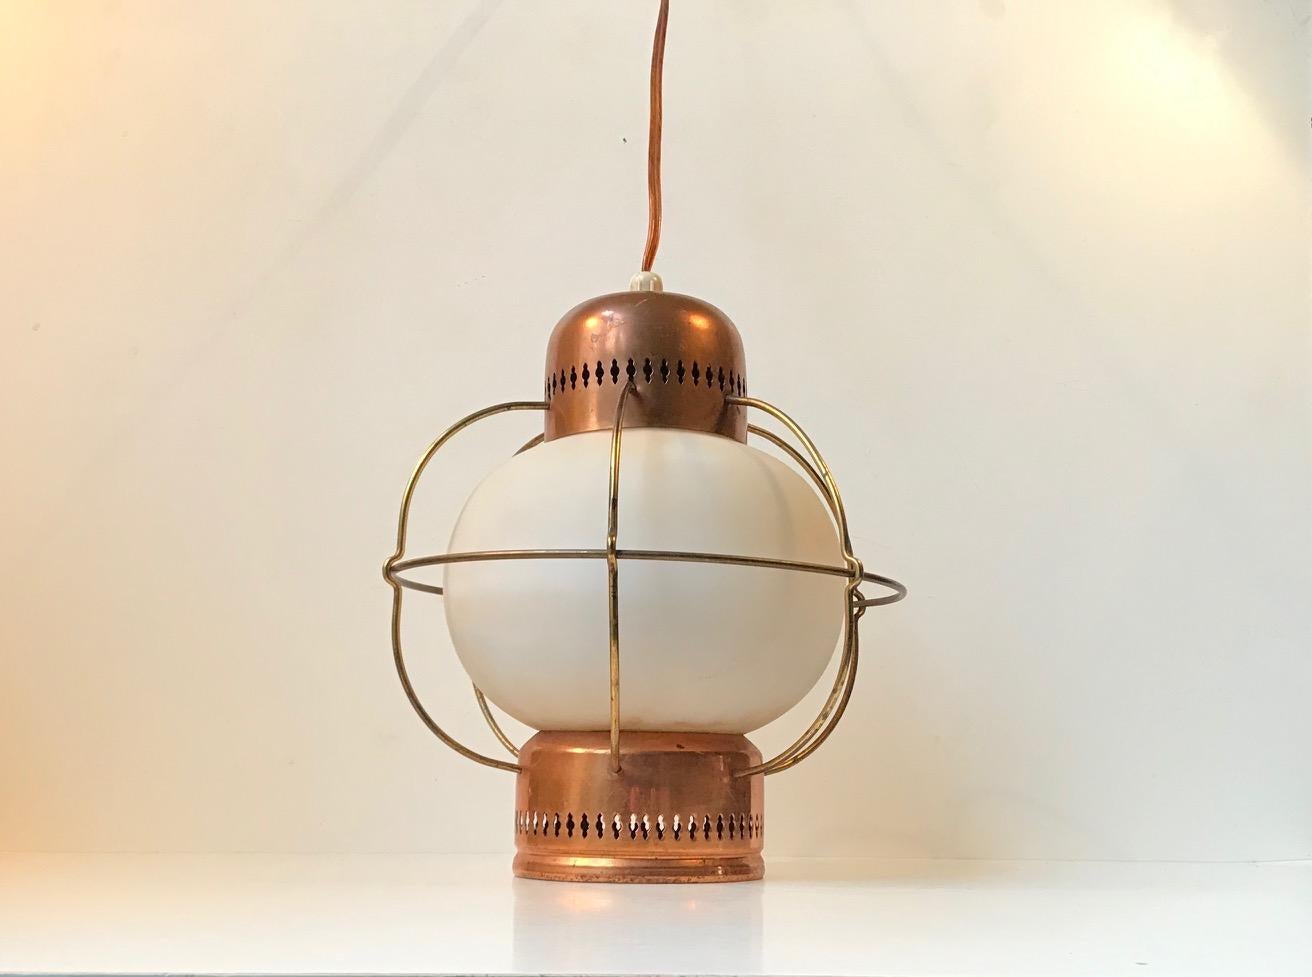 - A vintage maritime pendant lamp
- Made of copper, brass, opaline glass and caged in brass wire
- It was manufactured by Lyfa in Denmark during the 1960s
- The design may have been executed by Bent Karlby. But this remains uncatalogued.